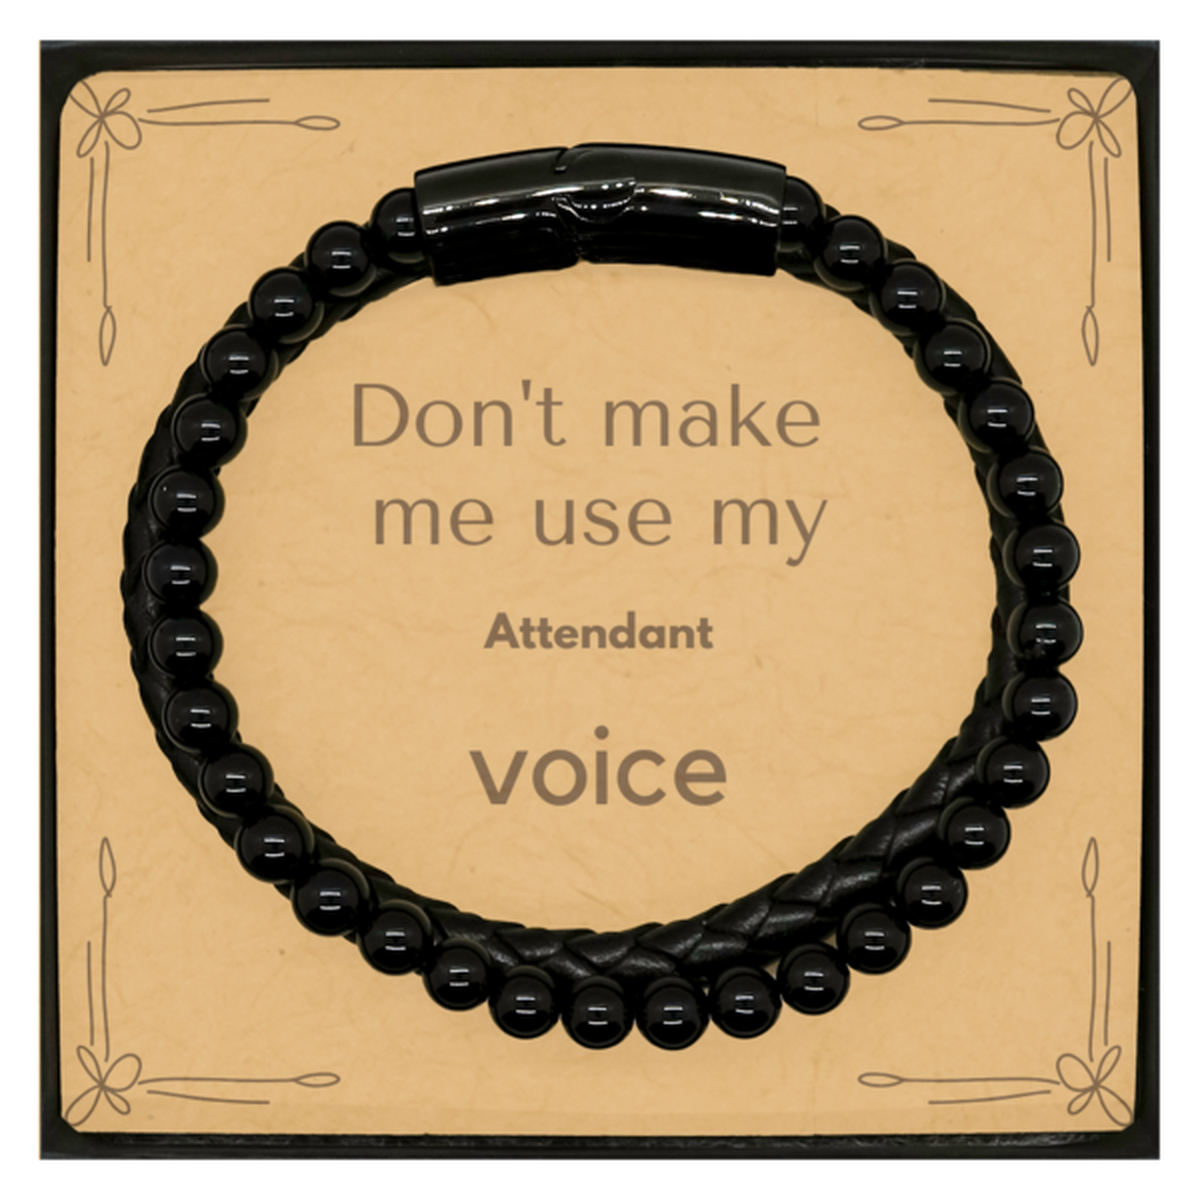 Don't make me use my Attendant voice, Sarcasm Attendant Card Gifts, Christmas Attendant Stone Leather Bracelets Birthday Unique Gifts For Attendant Coworkers, Men, Women, Colleague, Friends